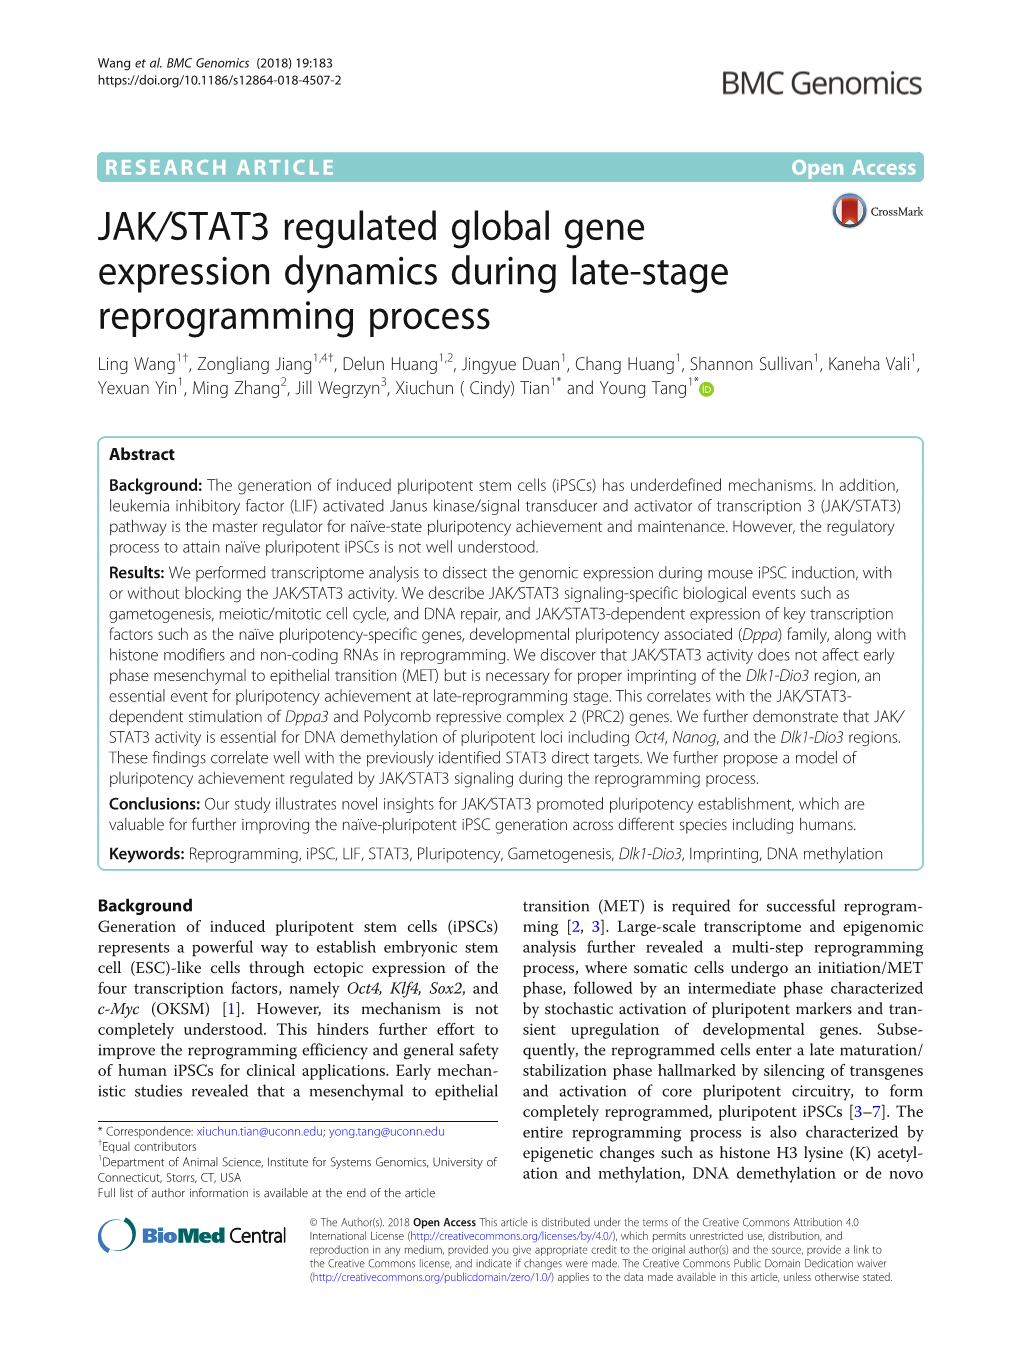 JAK/STAT3 Regulated Global Gene Expression Dynamics During Late-Stage Reprogramming Process